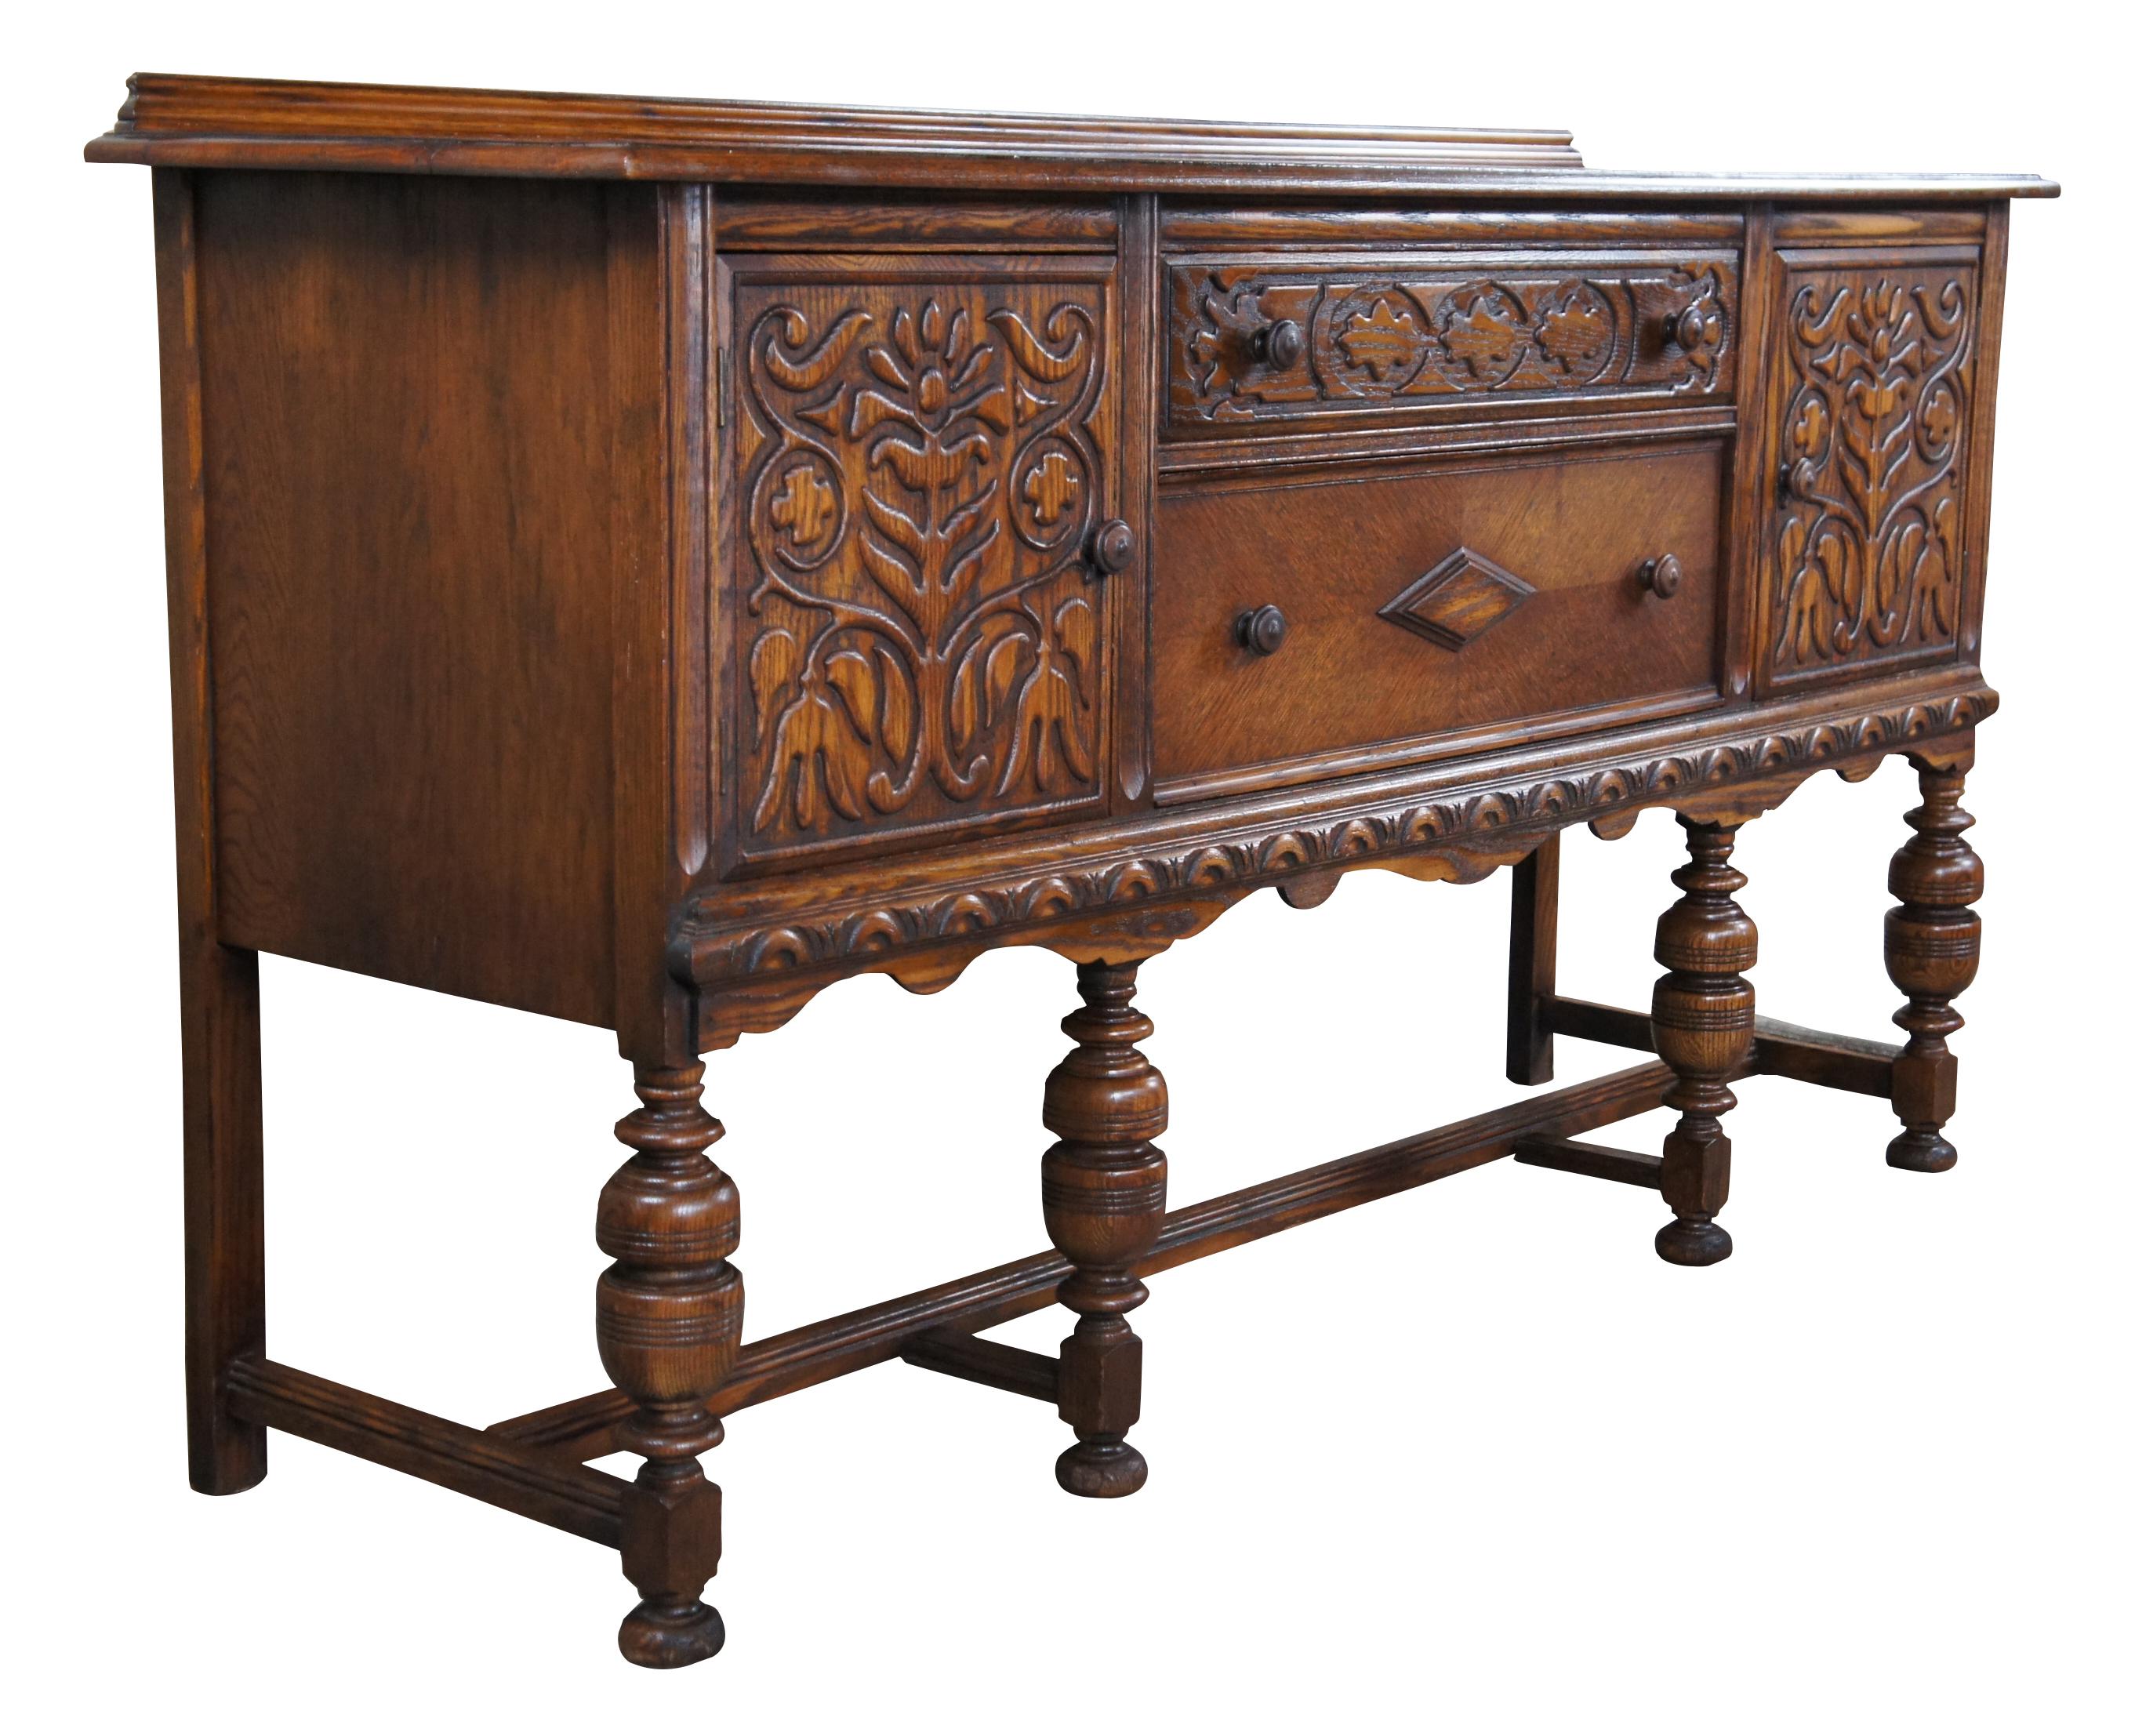 Early 20th century Jacobean / Elizabethan revival buffet or server. A rectangular form made from oak two central drawers flanked by outer storage cabinets. Features beautiful carving throughout, a serpentine apron, sleek backsplash and turned